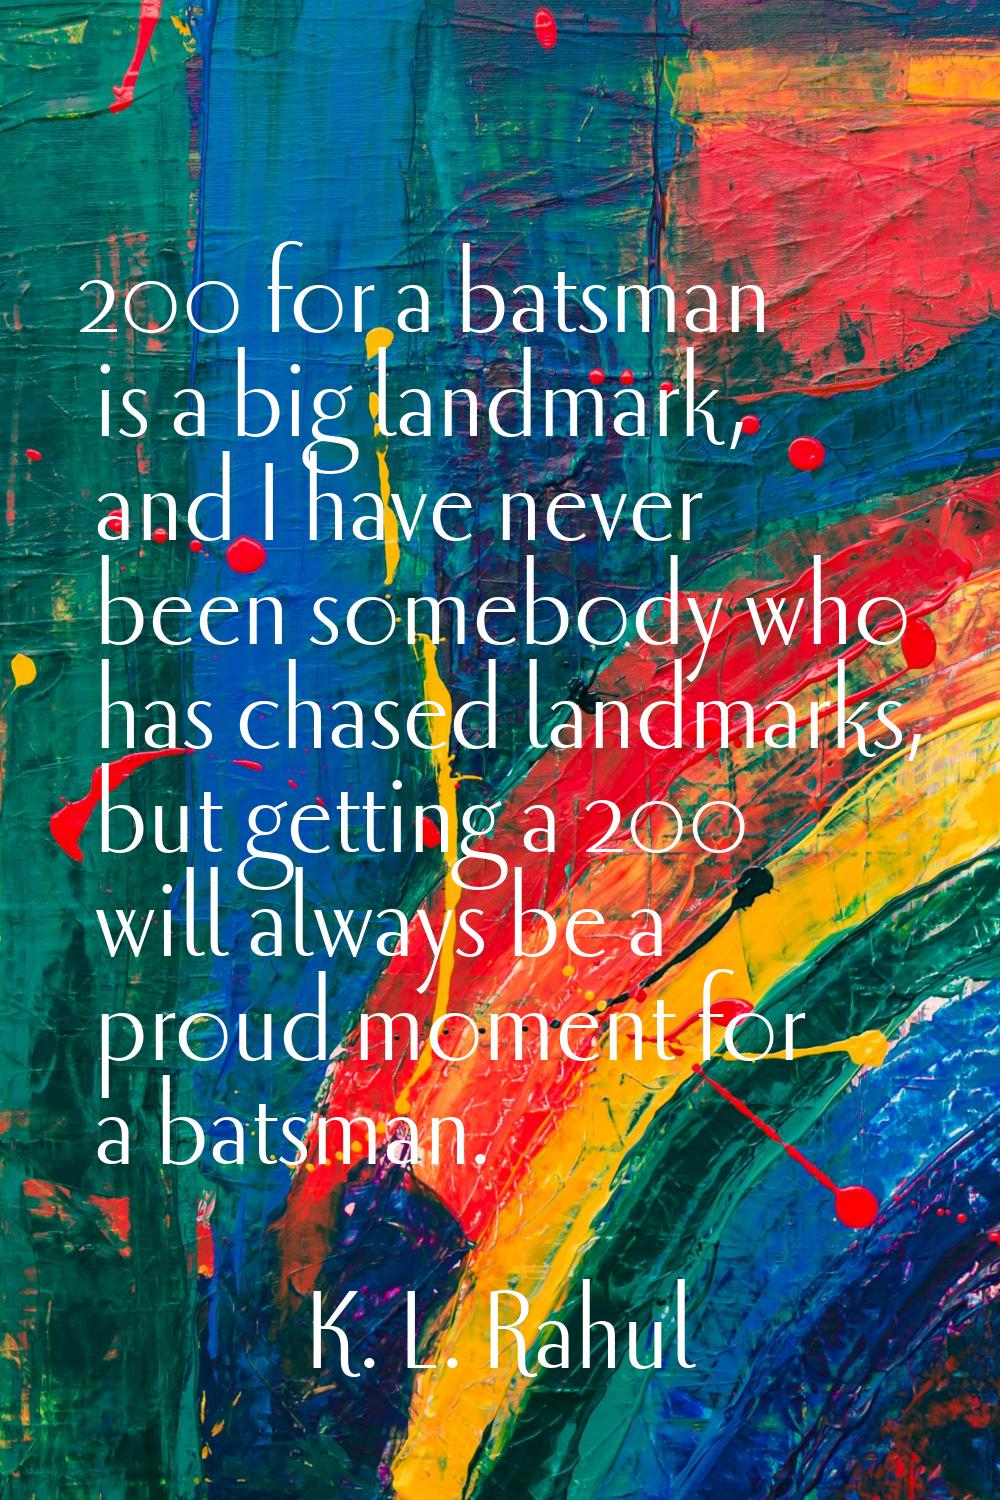 200 for a batsman is a big landmark, and I have never been somebody who has chased landmarks, but g